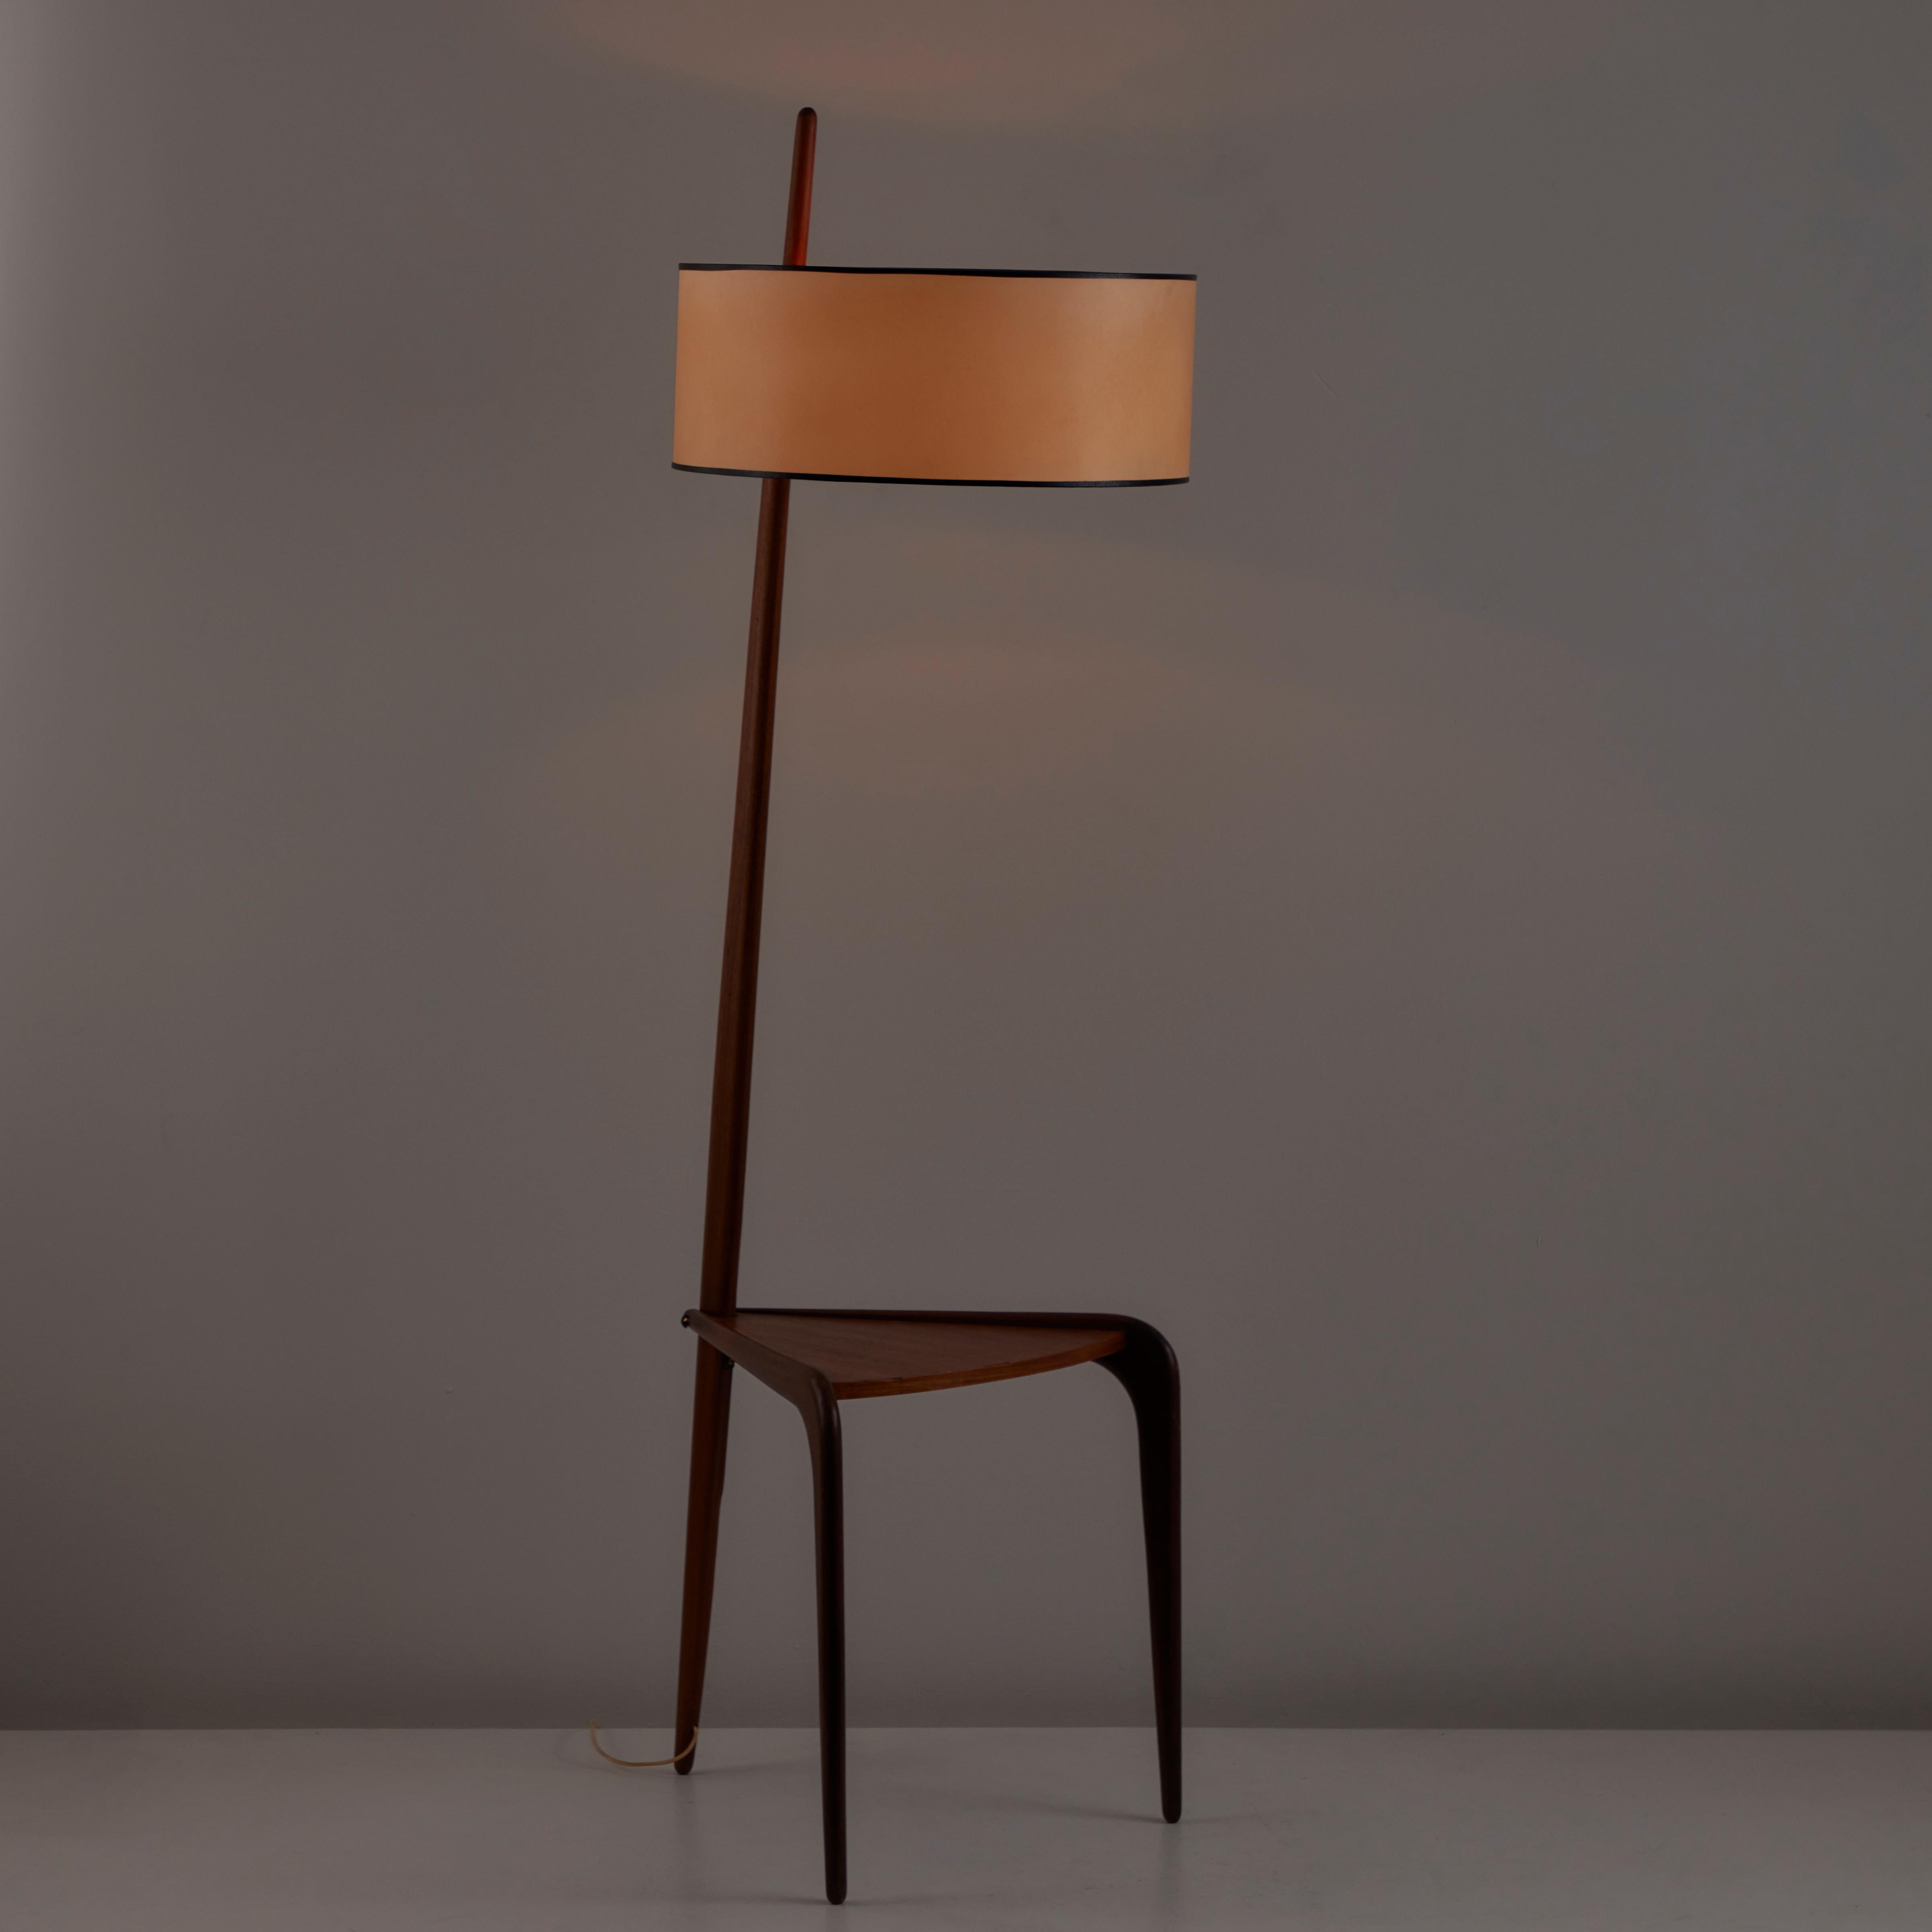 Model 167.A82 Floor Lamp by Rispal. Designed and manufactured in France, circa 1950s. Rare floor lamp featuring a soft wooden frame, parchment shade, and a three legged base and end table surface seamlessly included in the frame. This lamp holds two